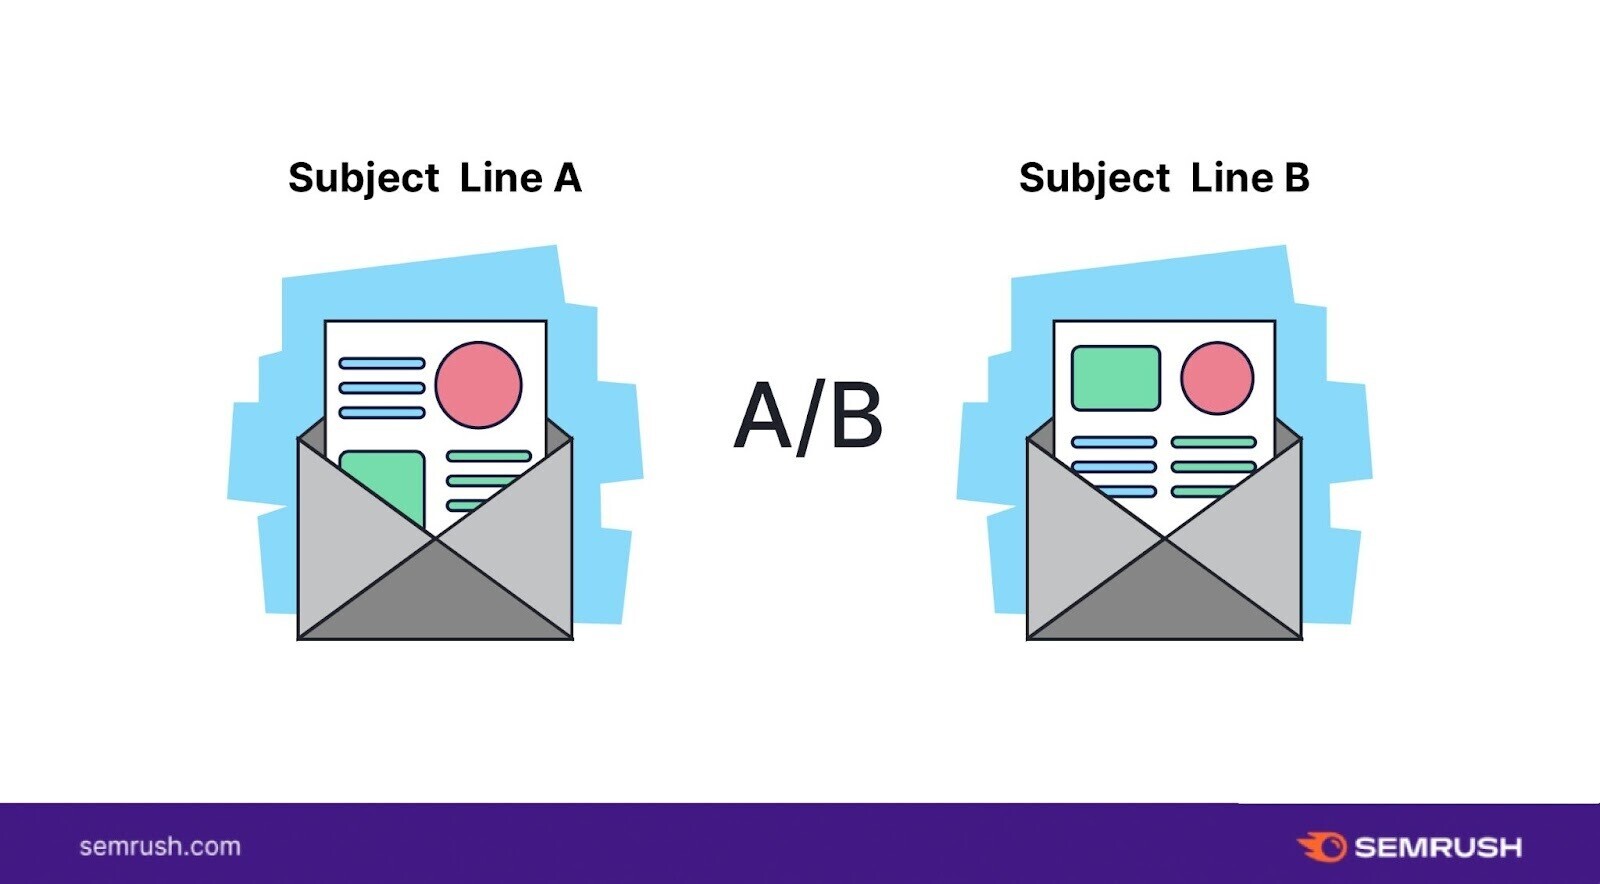 A/B testing allows you to send two different subject lines to a small percentage of your email list to determine which performs best and send that to the rest of the list